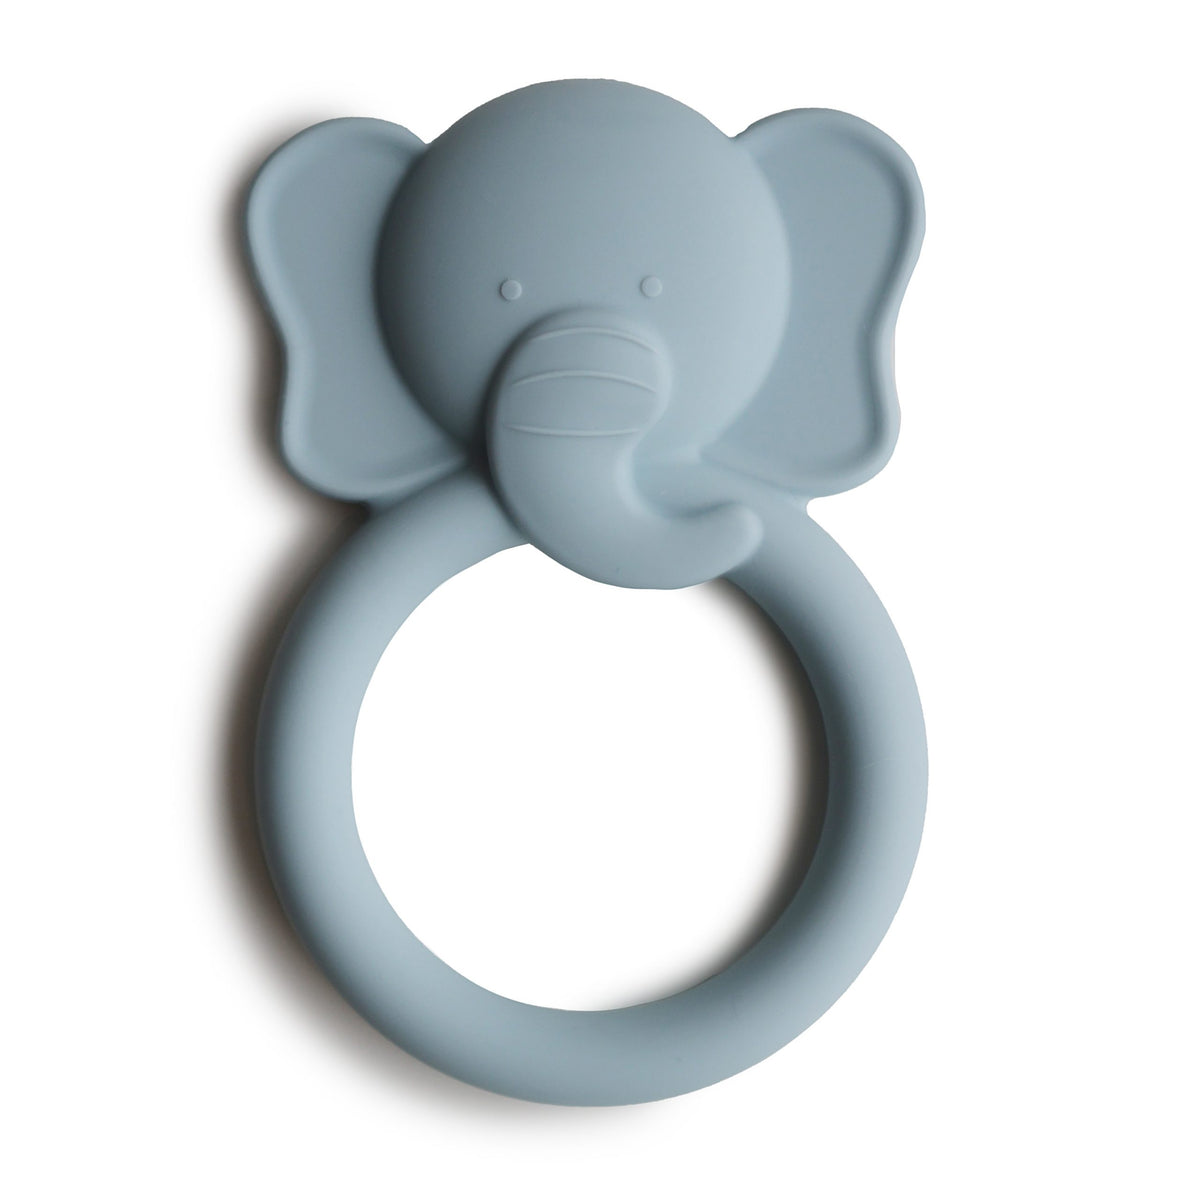 Mushie Elephant Silicone Teether - Cloud